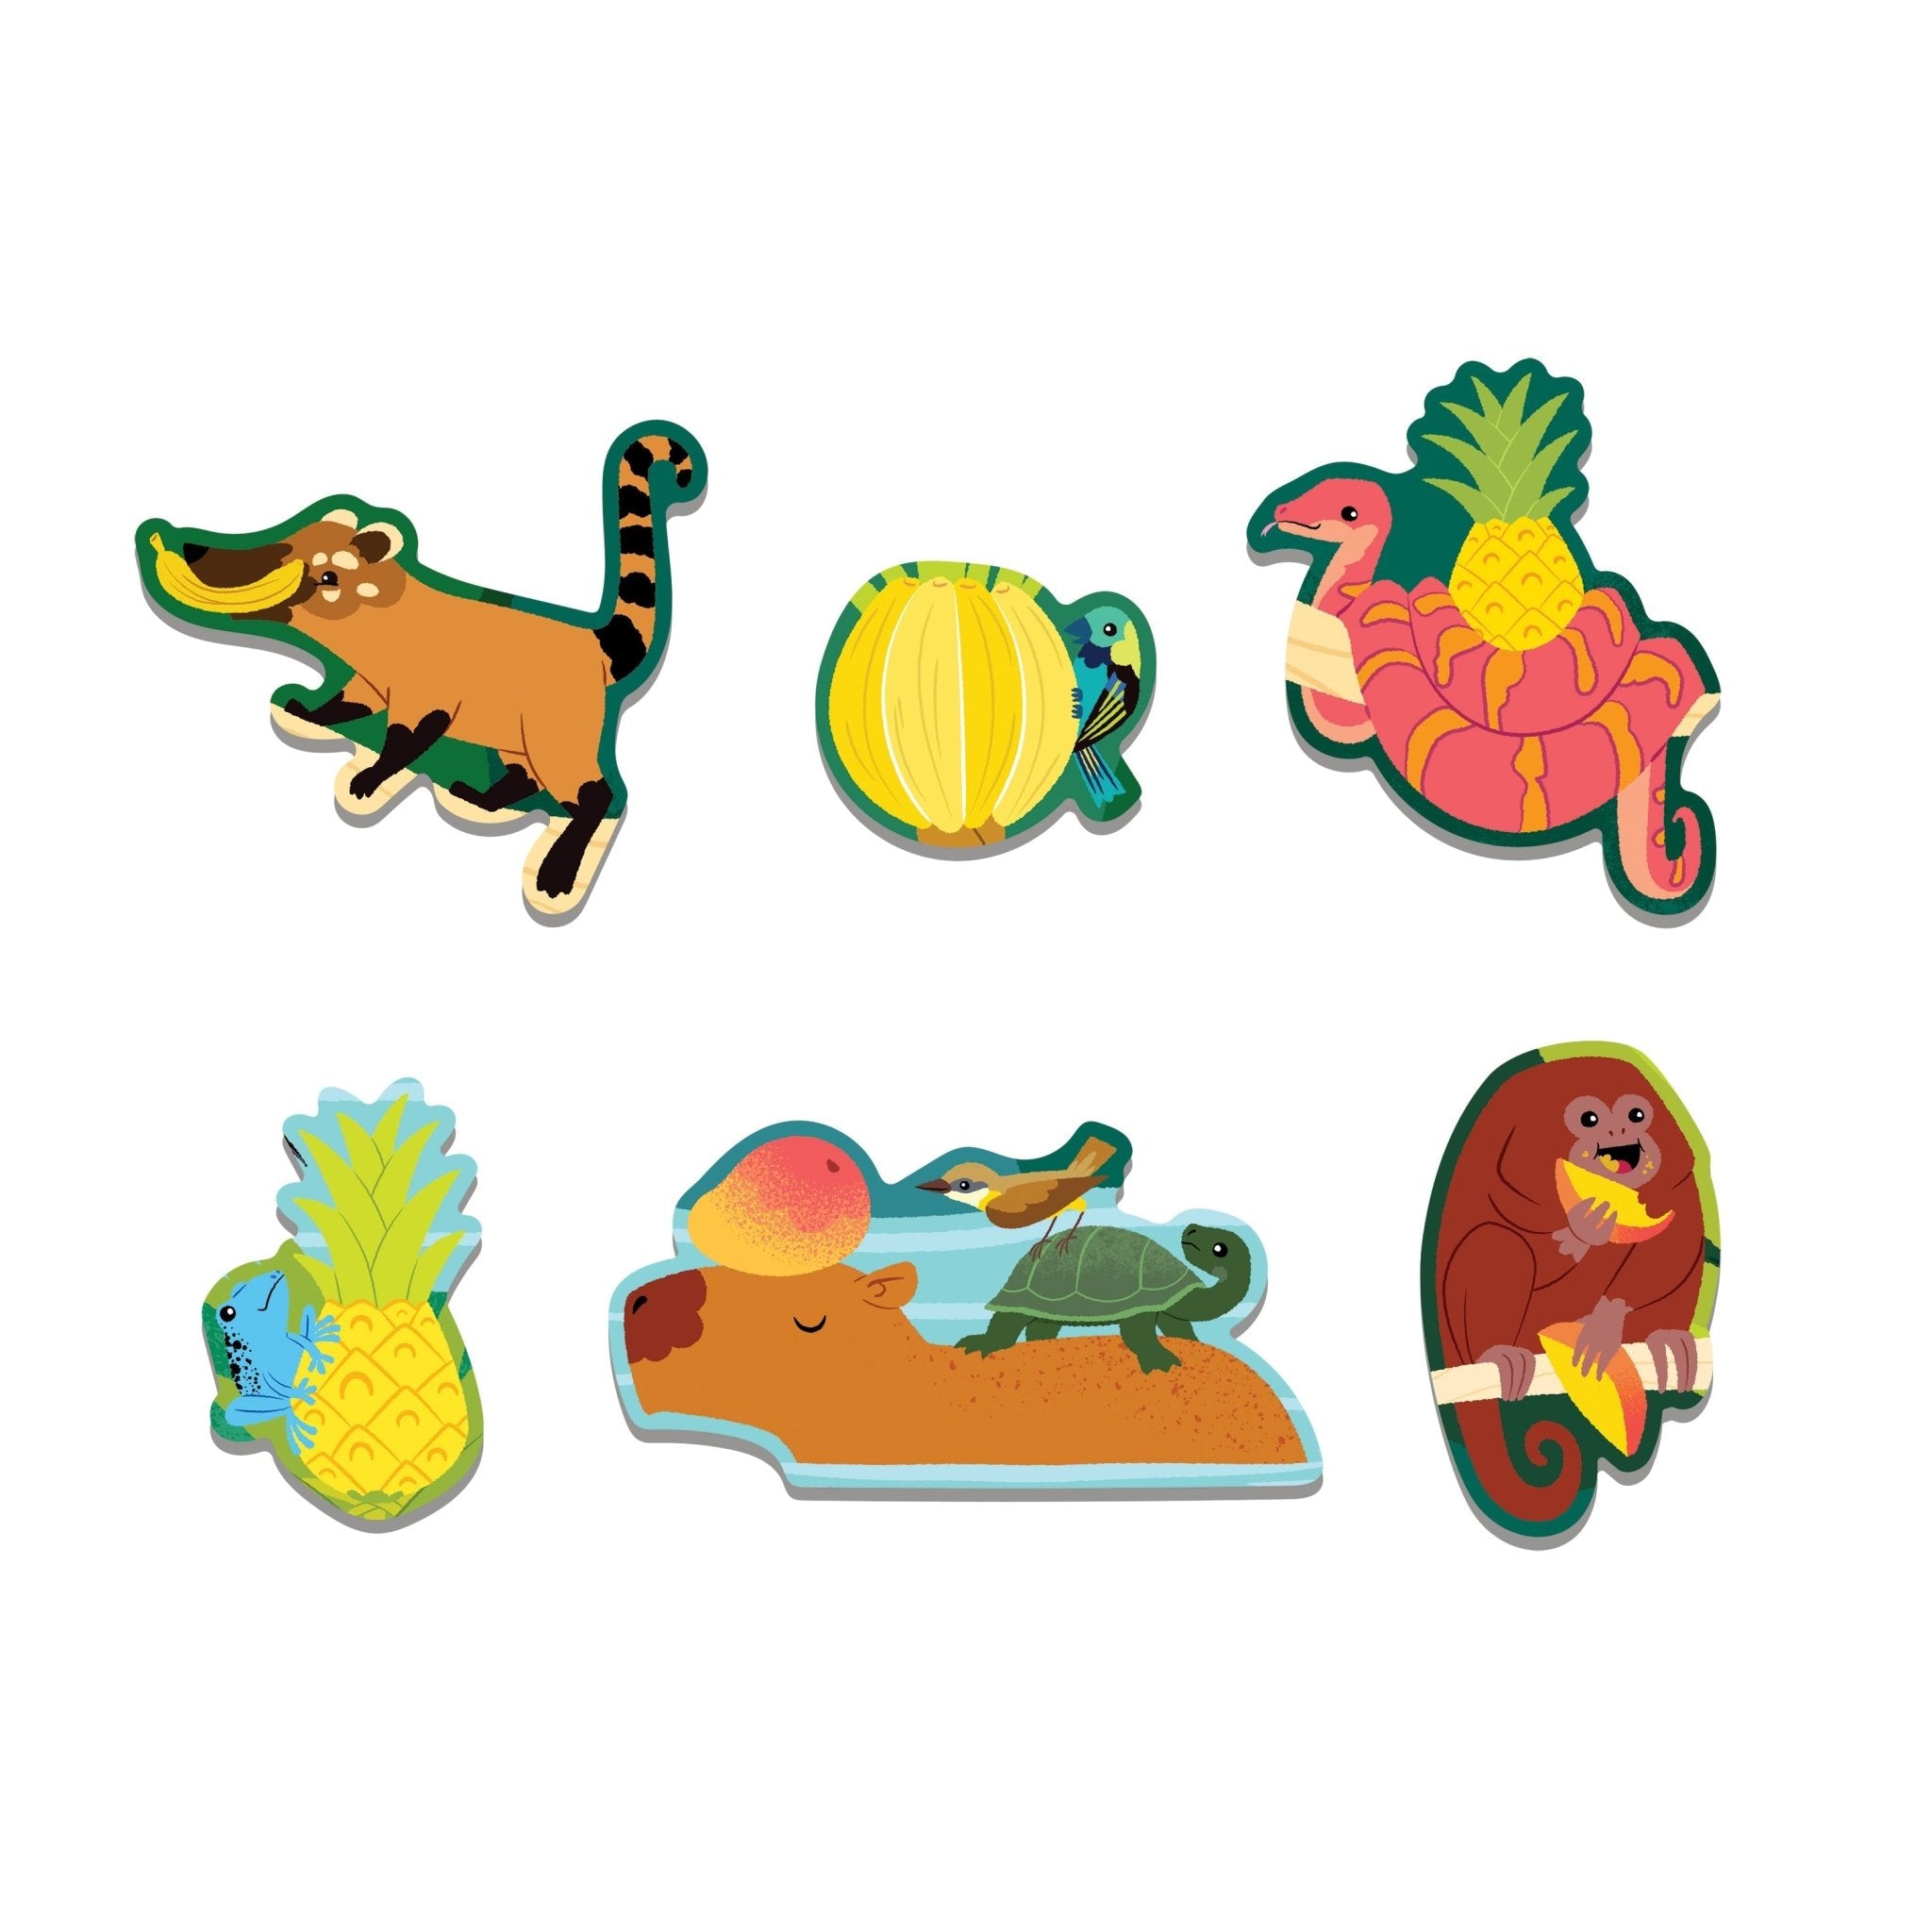 Food Festival 60 Piece Scratch and Sniff Puzzle